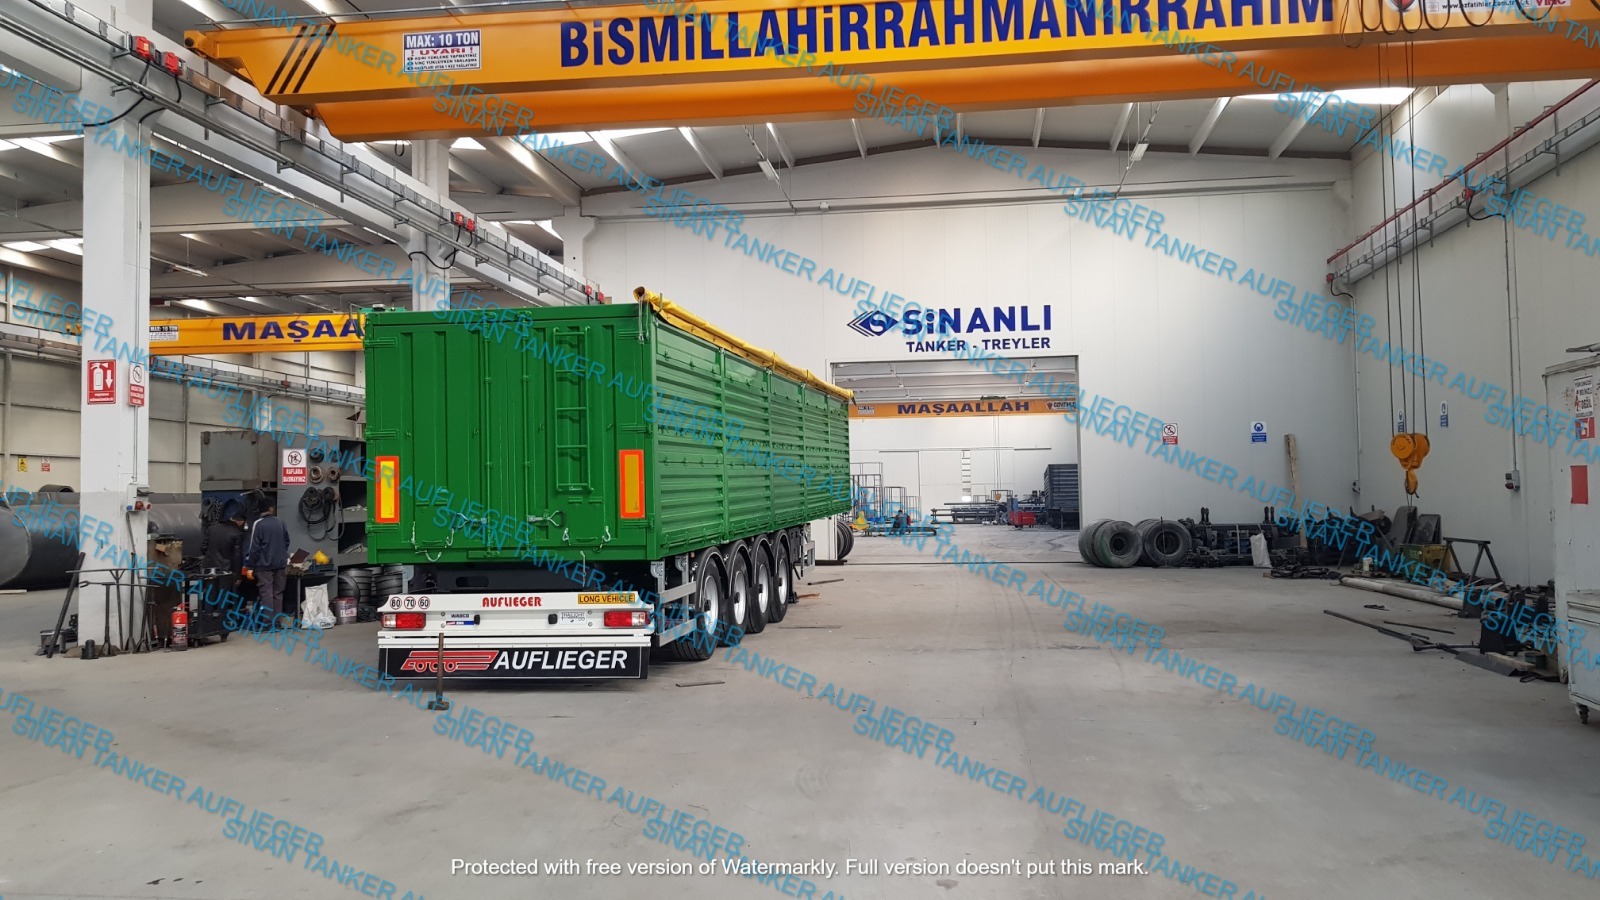 SİNANLI TANKER - TRAILER undefined: photos 20